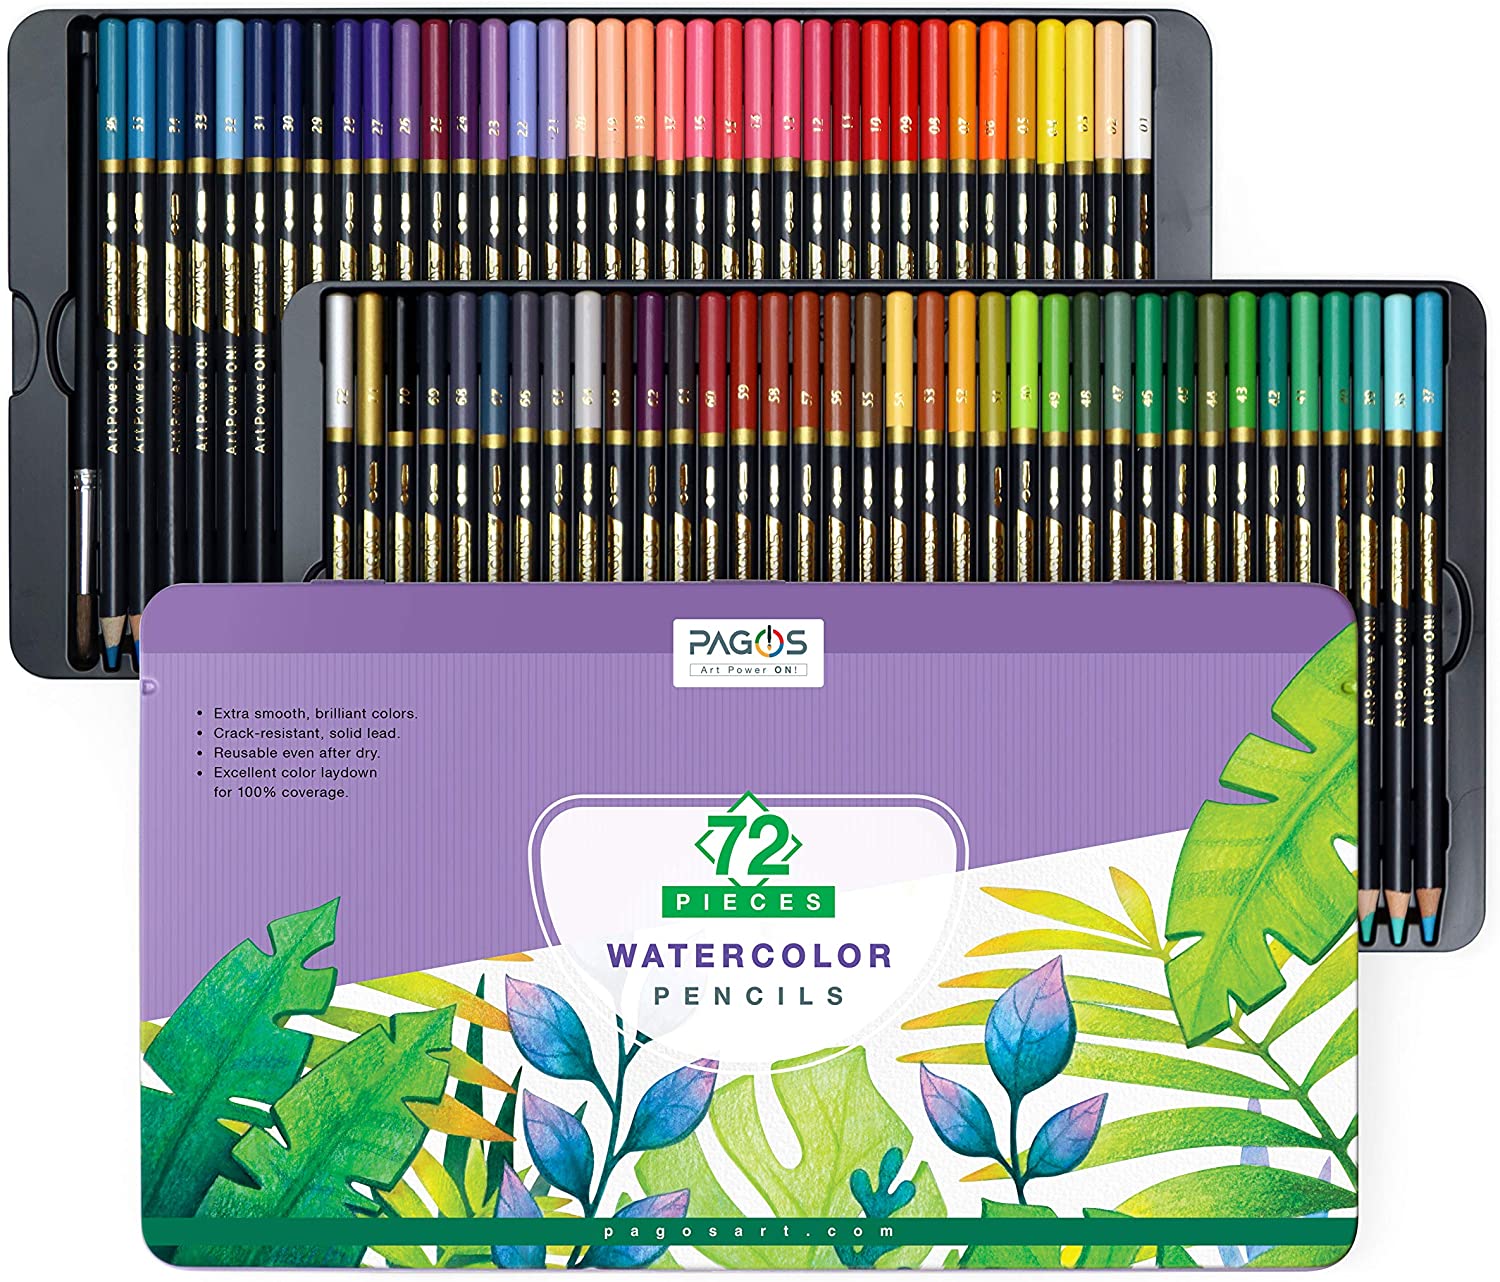 Popyola Water Soluble Colored Pencils 72 Ct